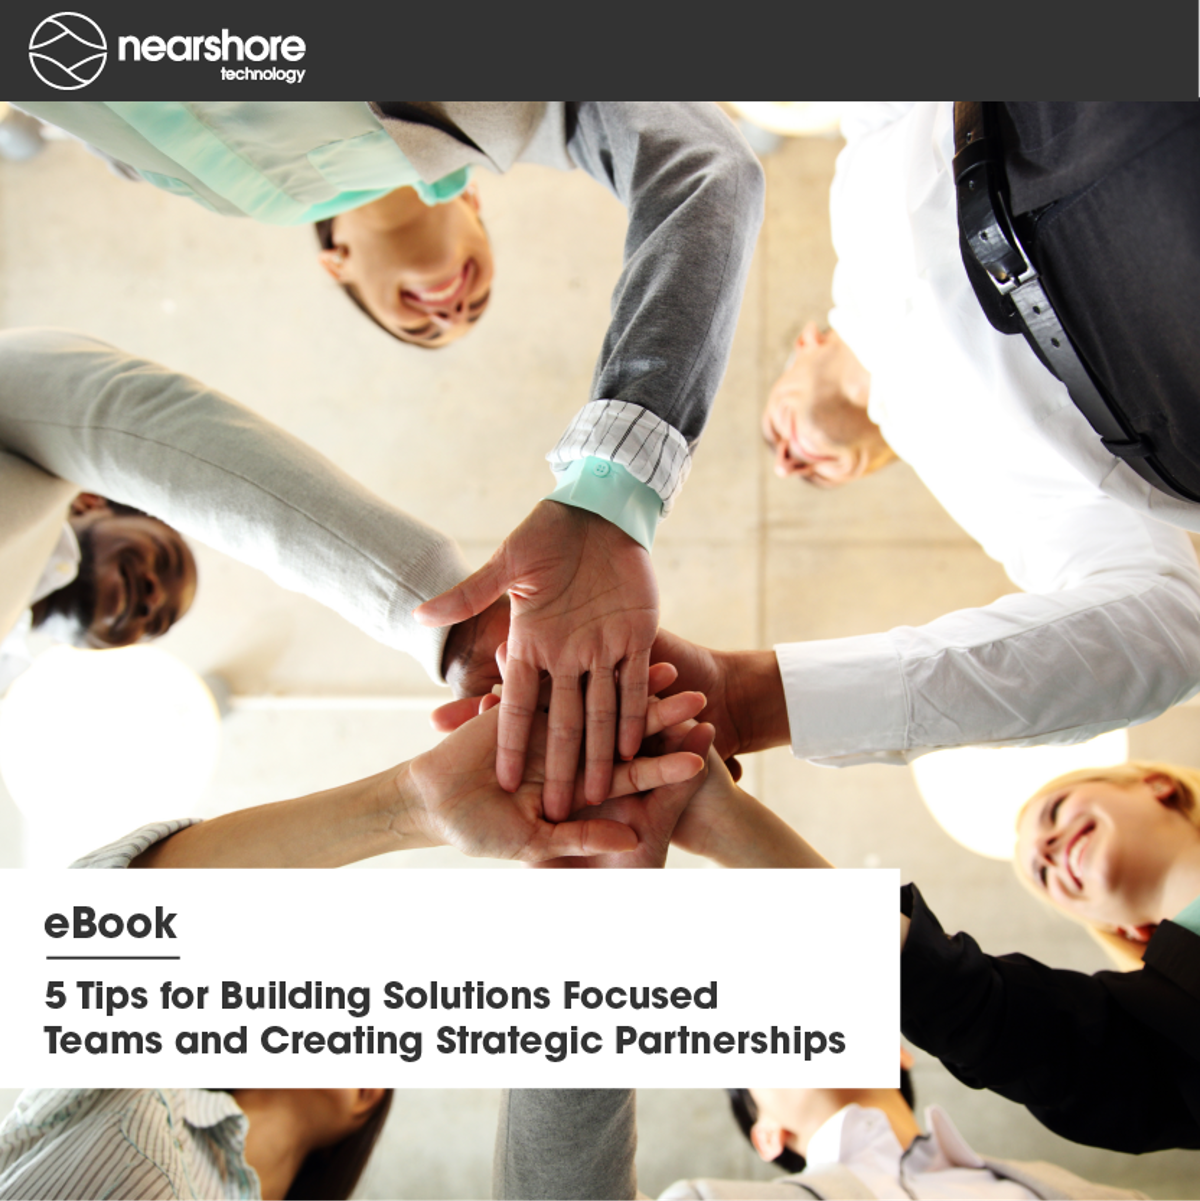 eBook: 5 Tips for Building Solutions Focused Teams and Creating Strategic Partnerships